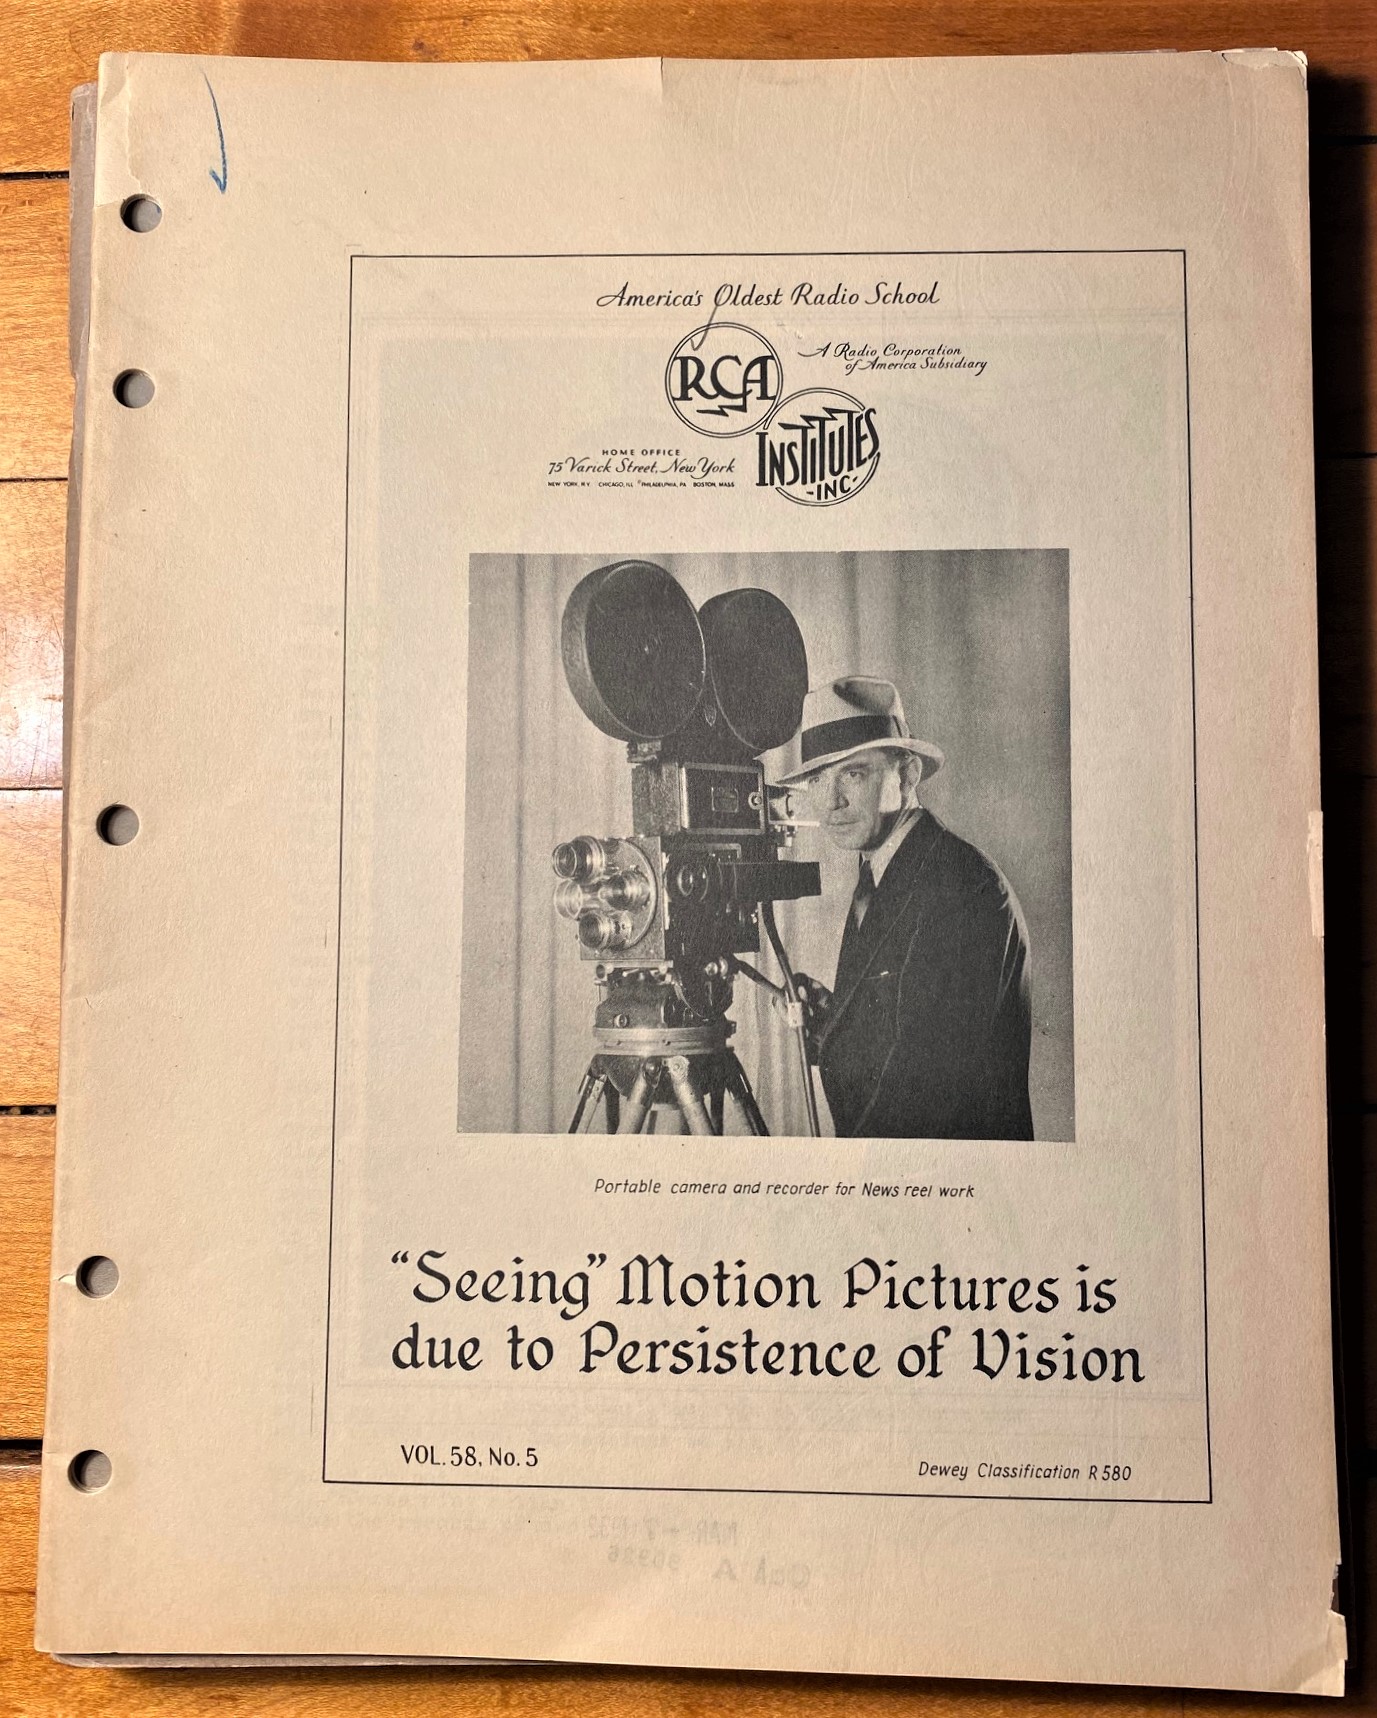 cover　Soft　(RCA　Seeing　is　Pictures.):　Motion　Pictures　(1947)　JF　of　by　Motion　Due　Persistence　to　Good　Science　Vision.　Sound-on-Film　Ptak　Very　Books